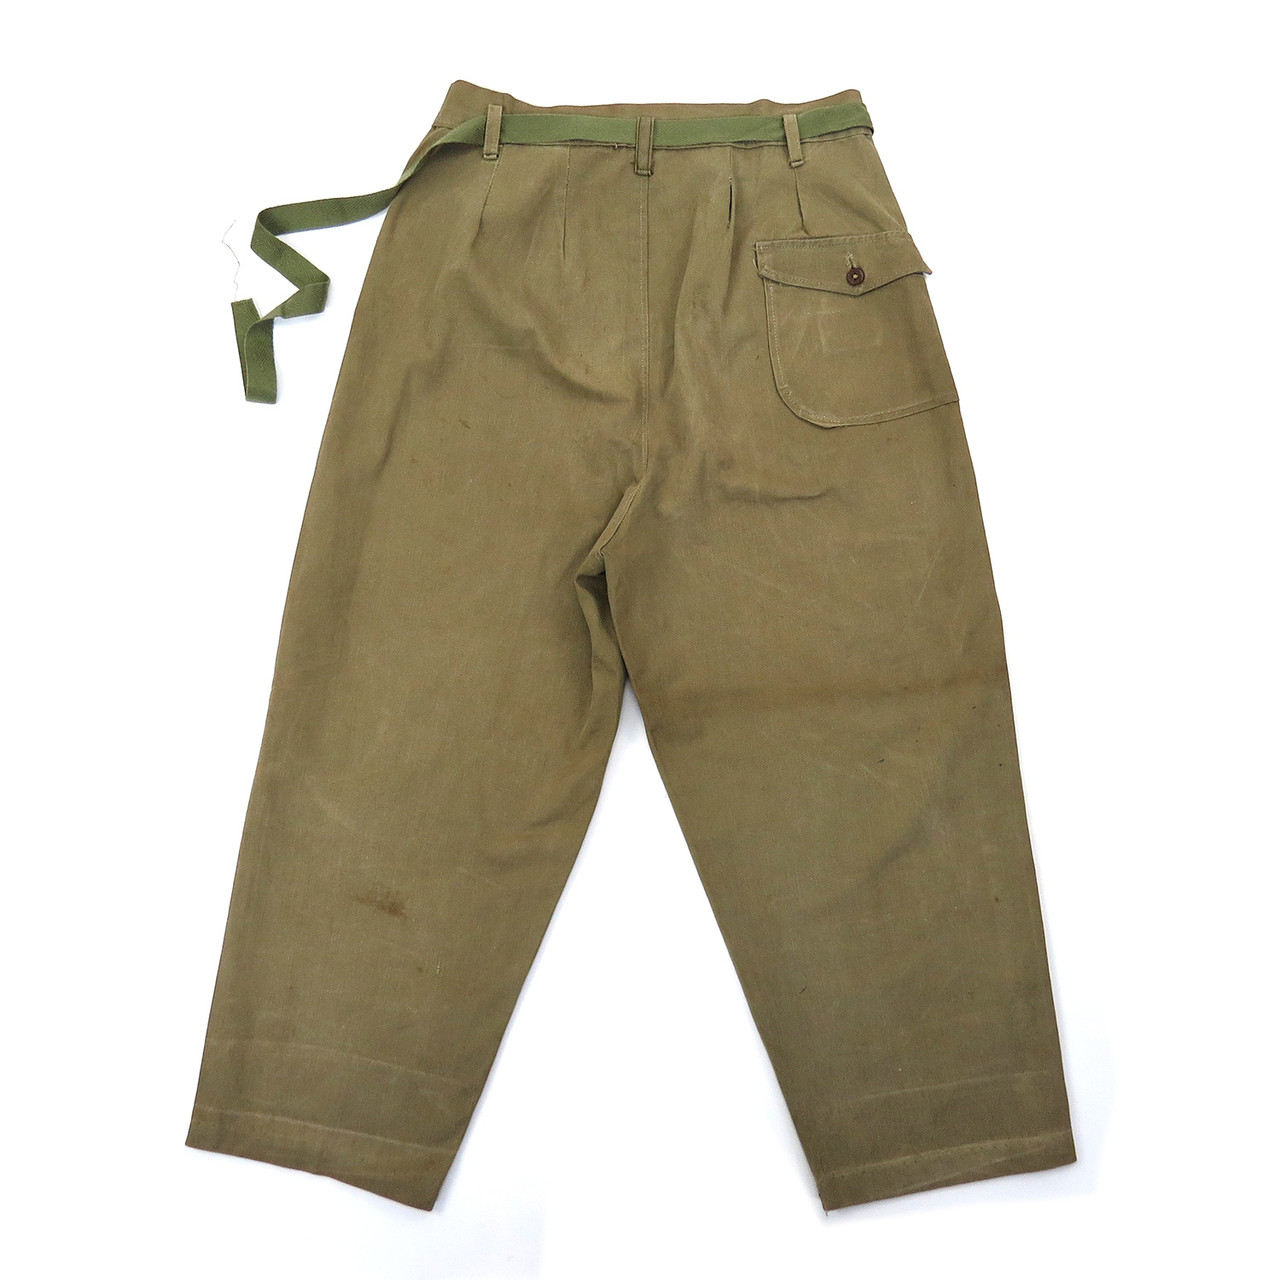 Japanese Army Women's Tropical Pants